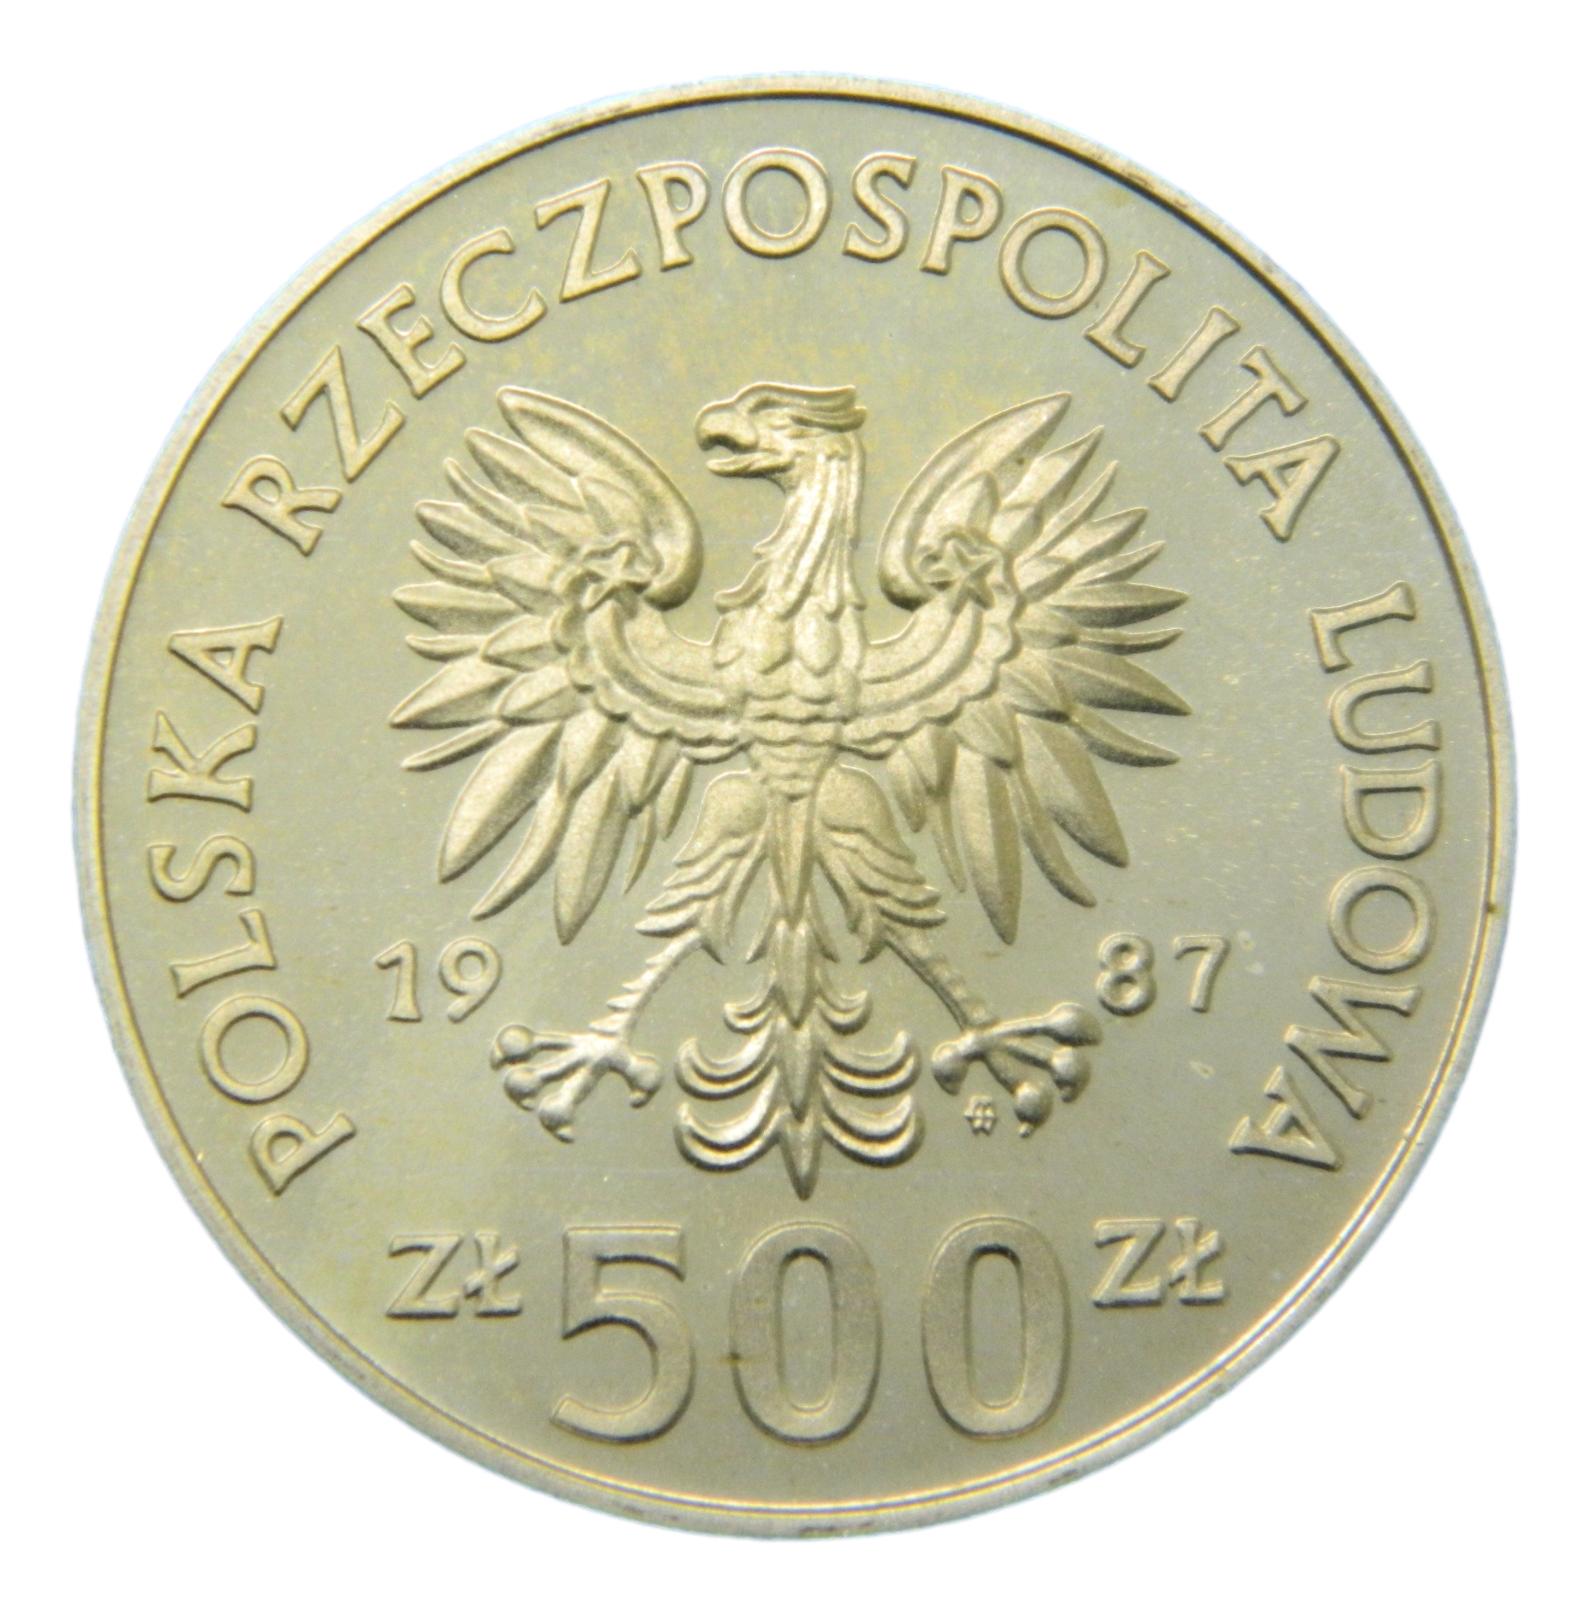 1987 - POLONIA - 500 ZLOTYCH - PROOF - JINETE - S6